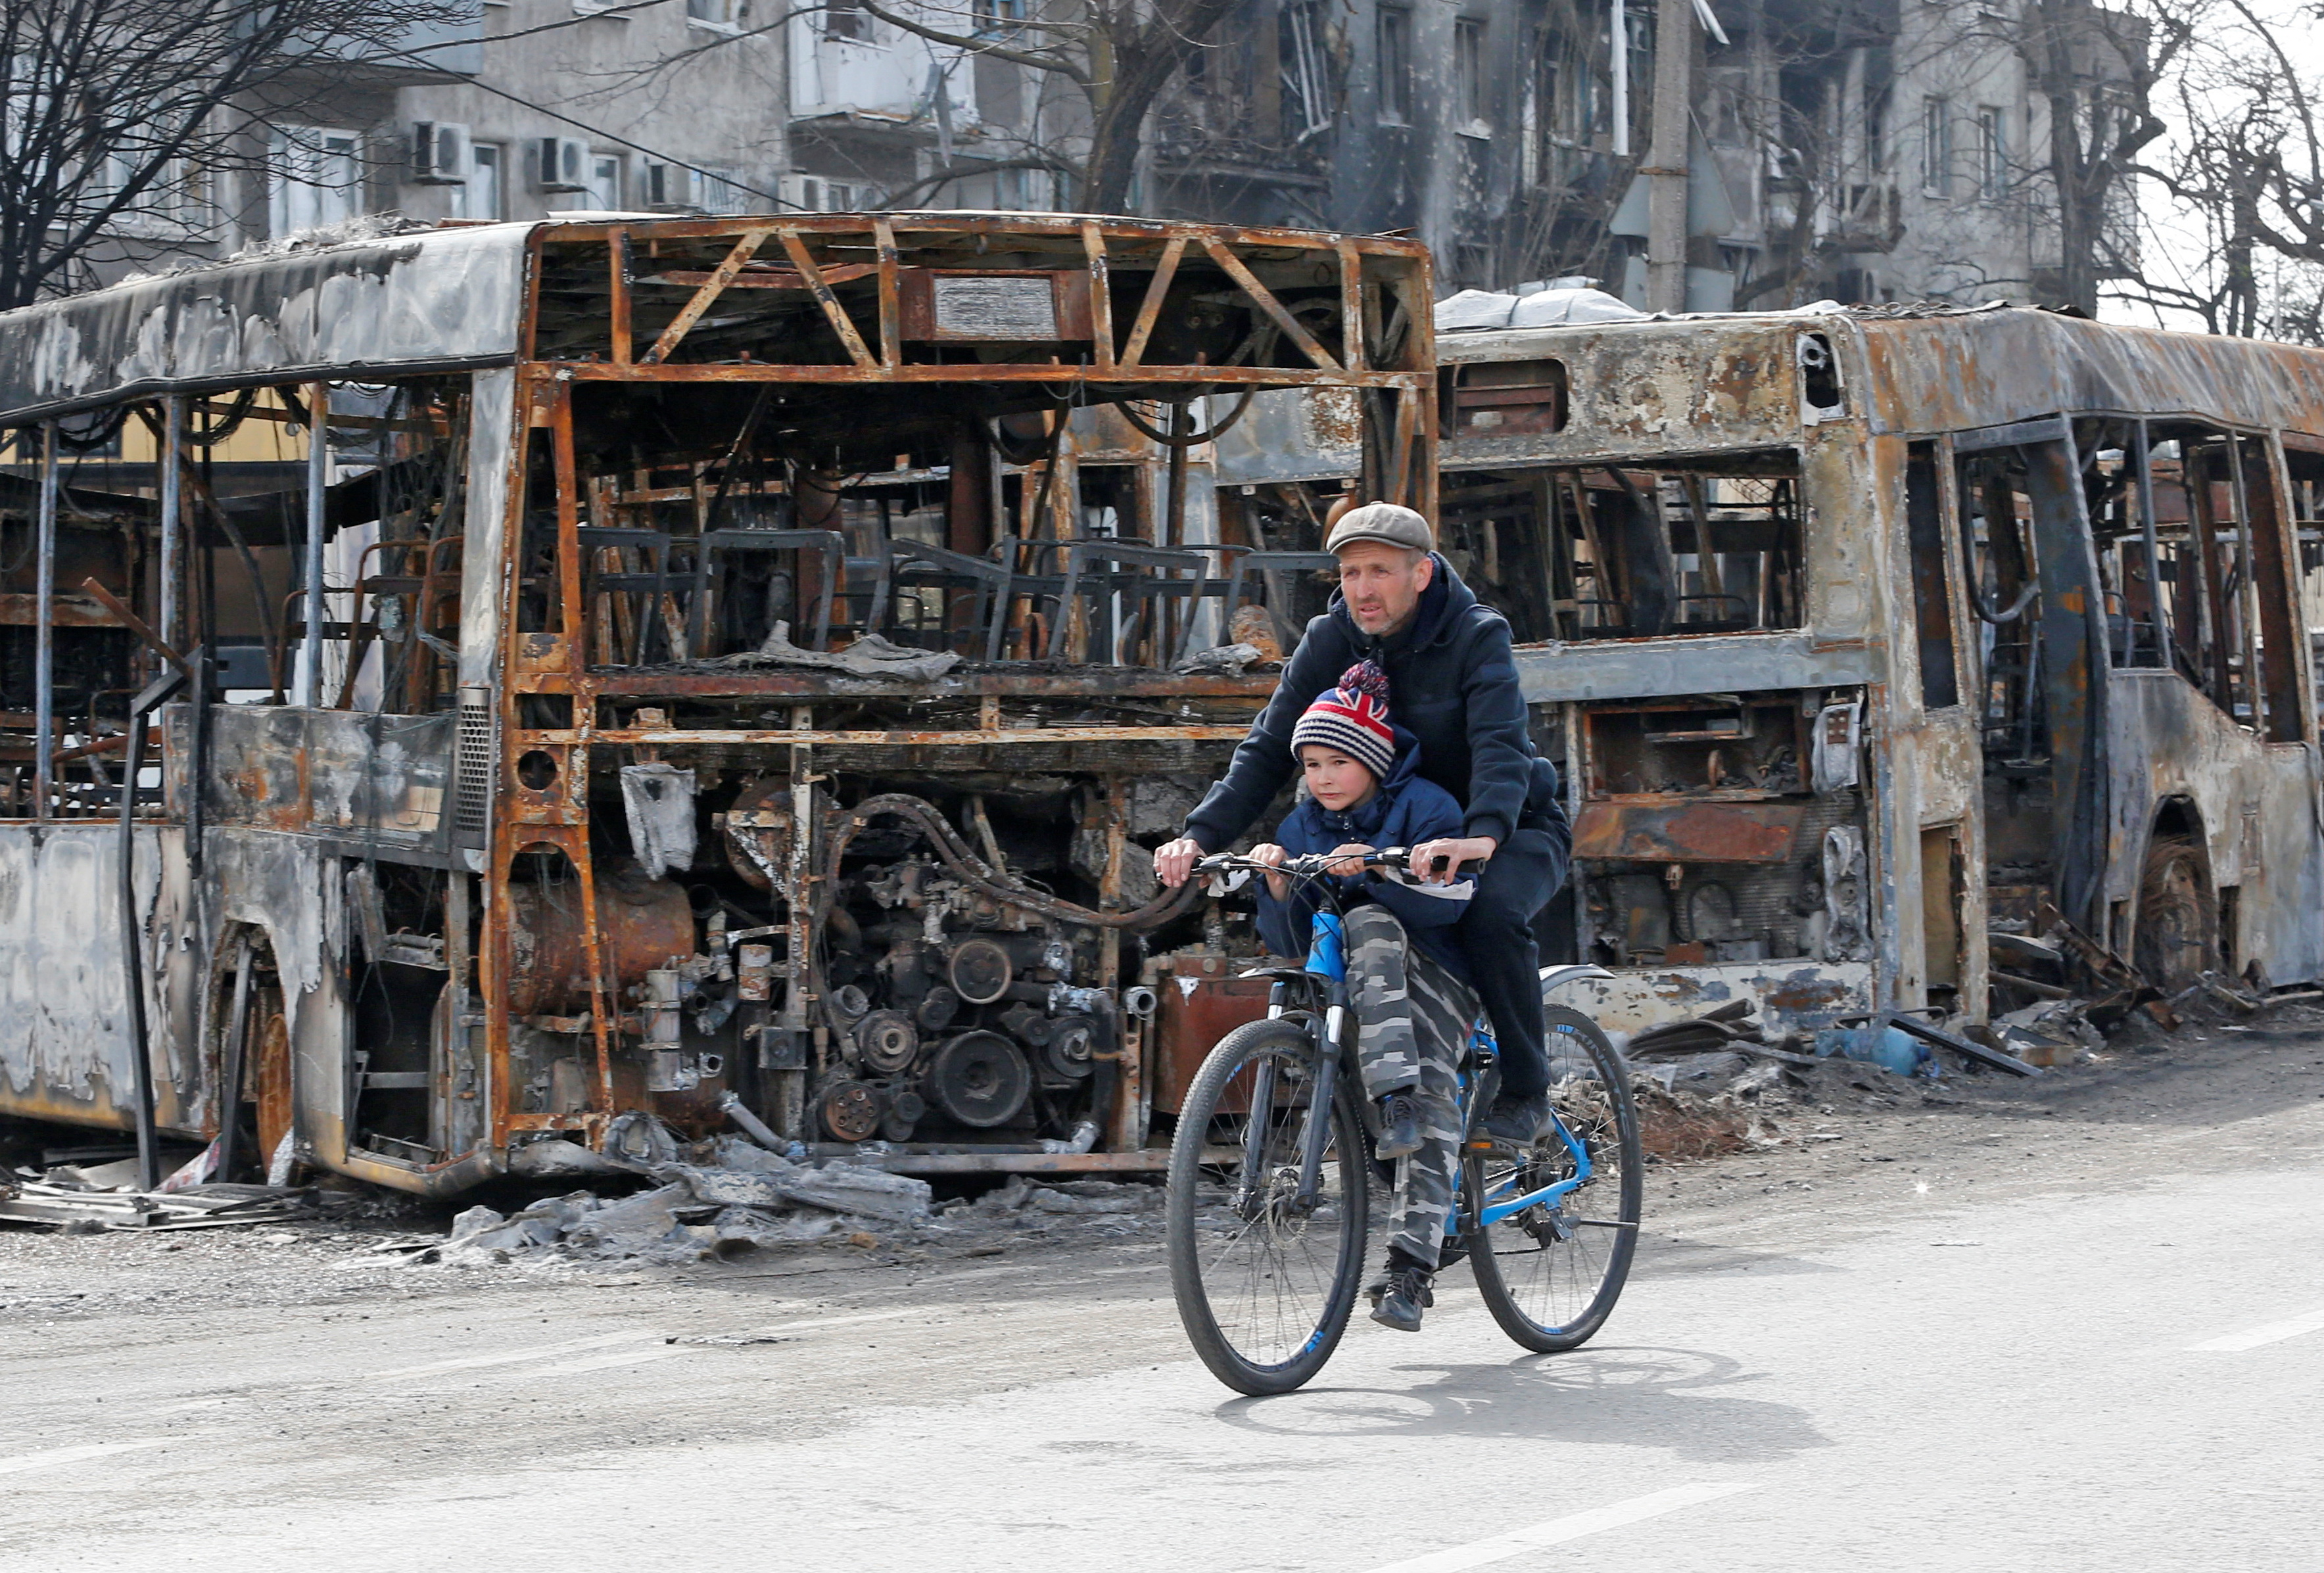 A man and a child ride a bicycle past burnt out buses in Mariupol